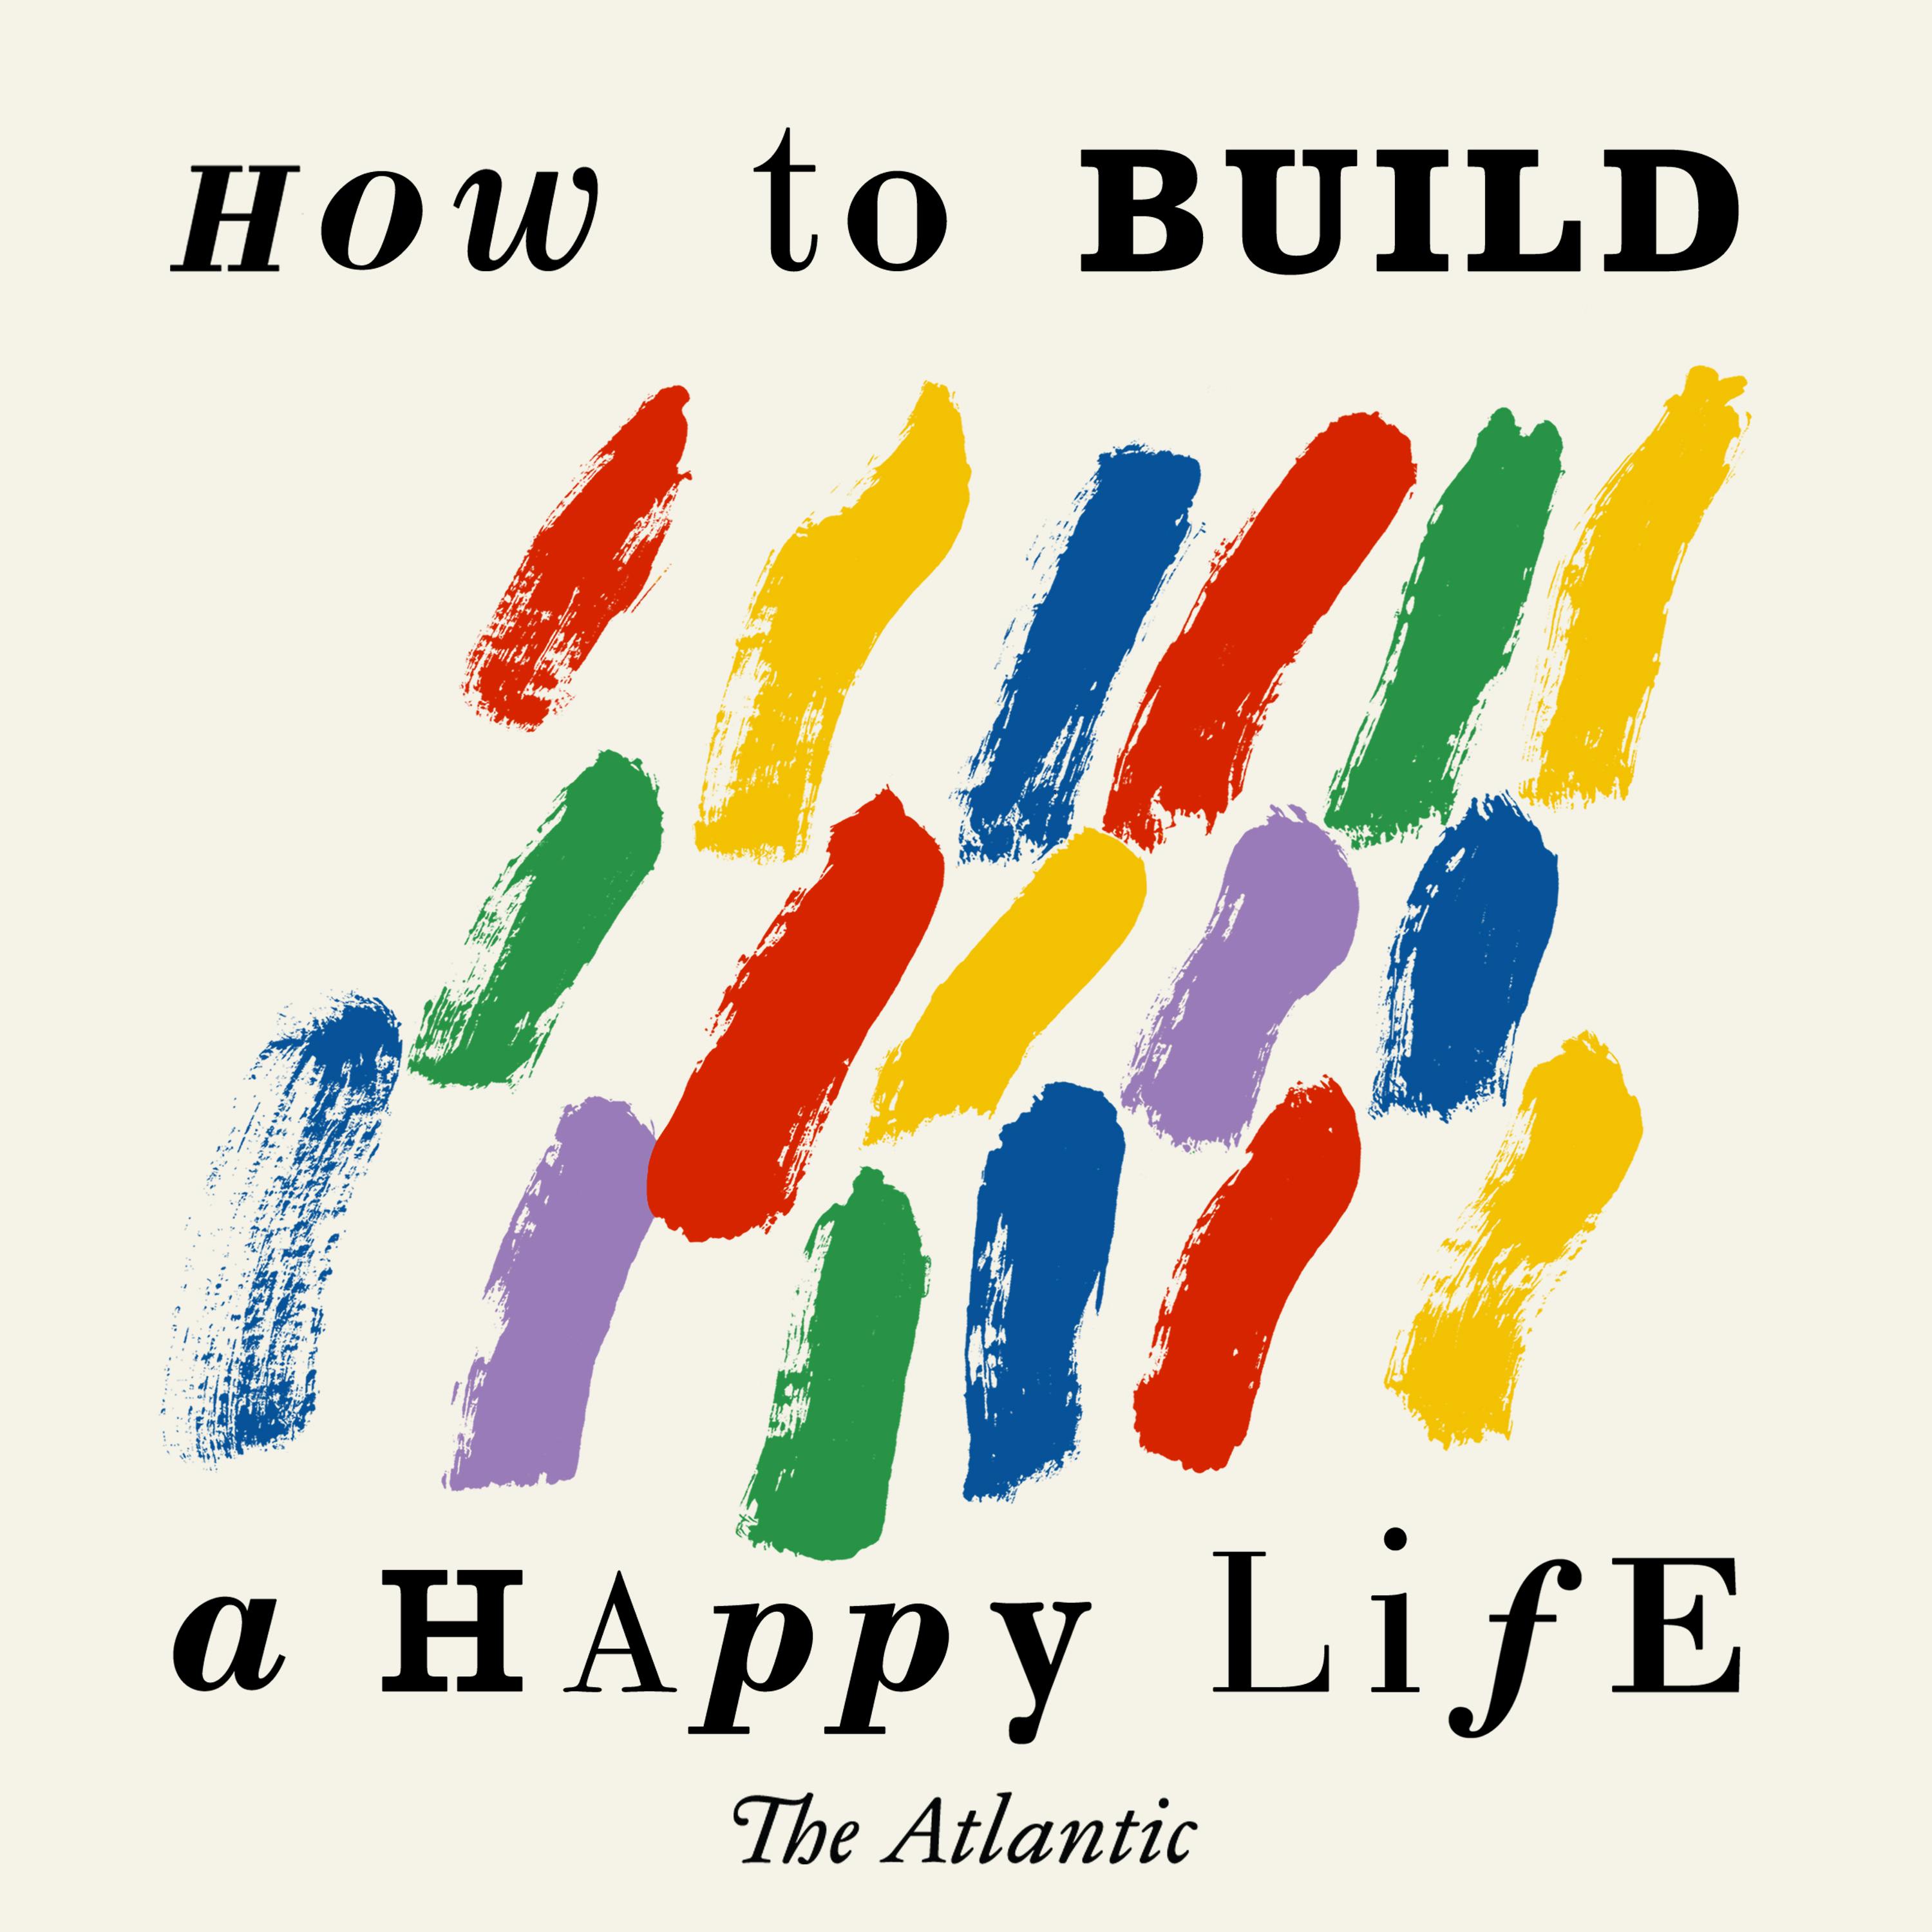 If You Want to Be the Best Version of You: ‘How to Build a Happy Life’